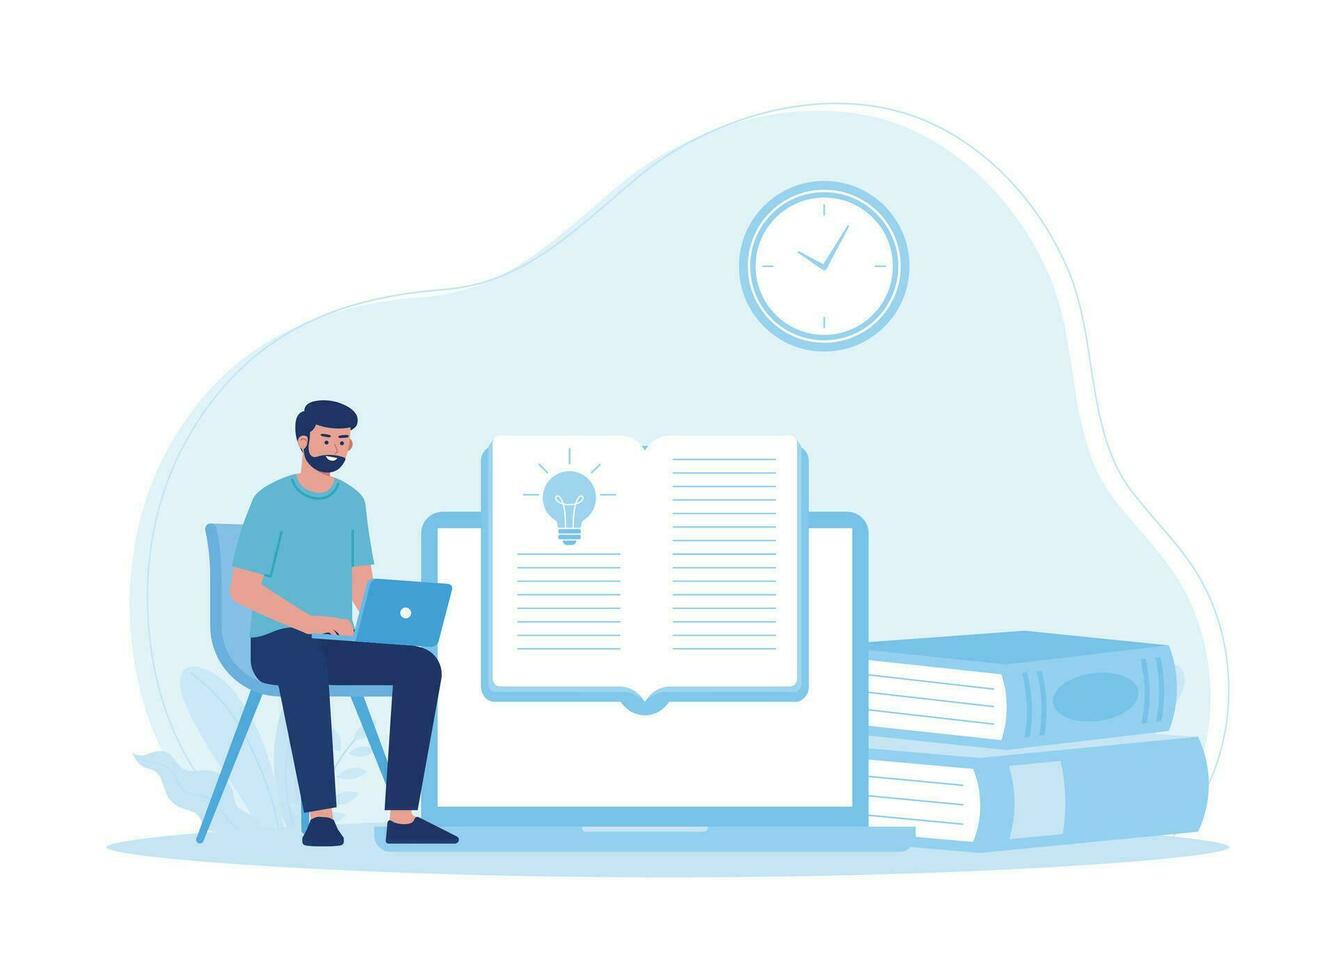 man studying with laptop. Online education and learning concept concept flat illustratiuon vector